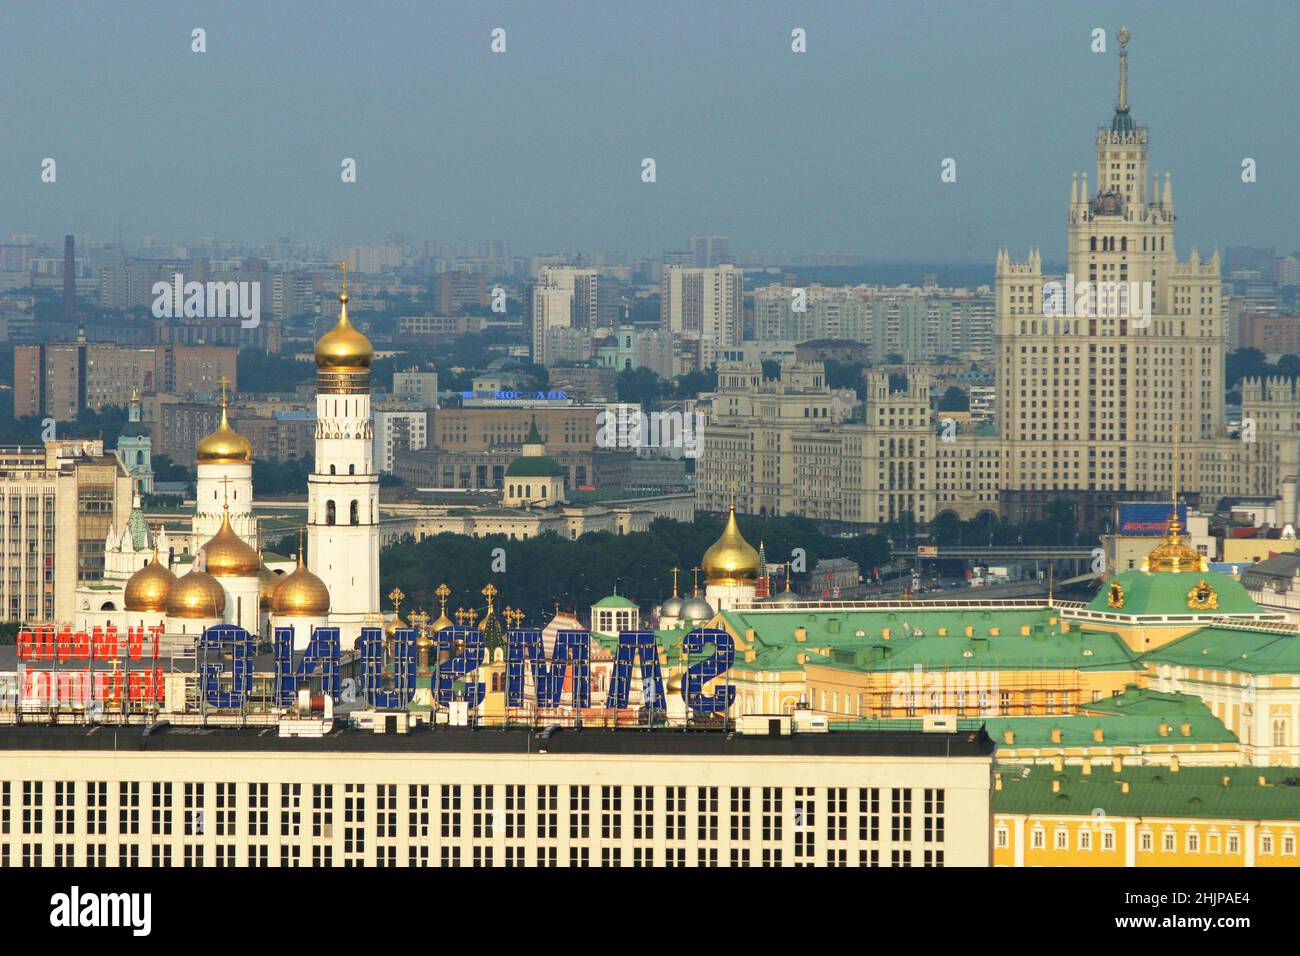 Moscow, Russia - May 20, 2020: Panoramic view on Kremlin palace, Ivan Veliki Church and belltower and stalinis hi-rise building. Light haze of smog. Stock Photo